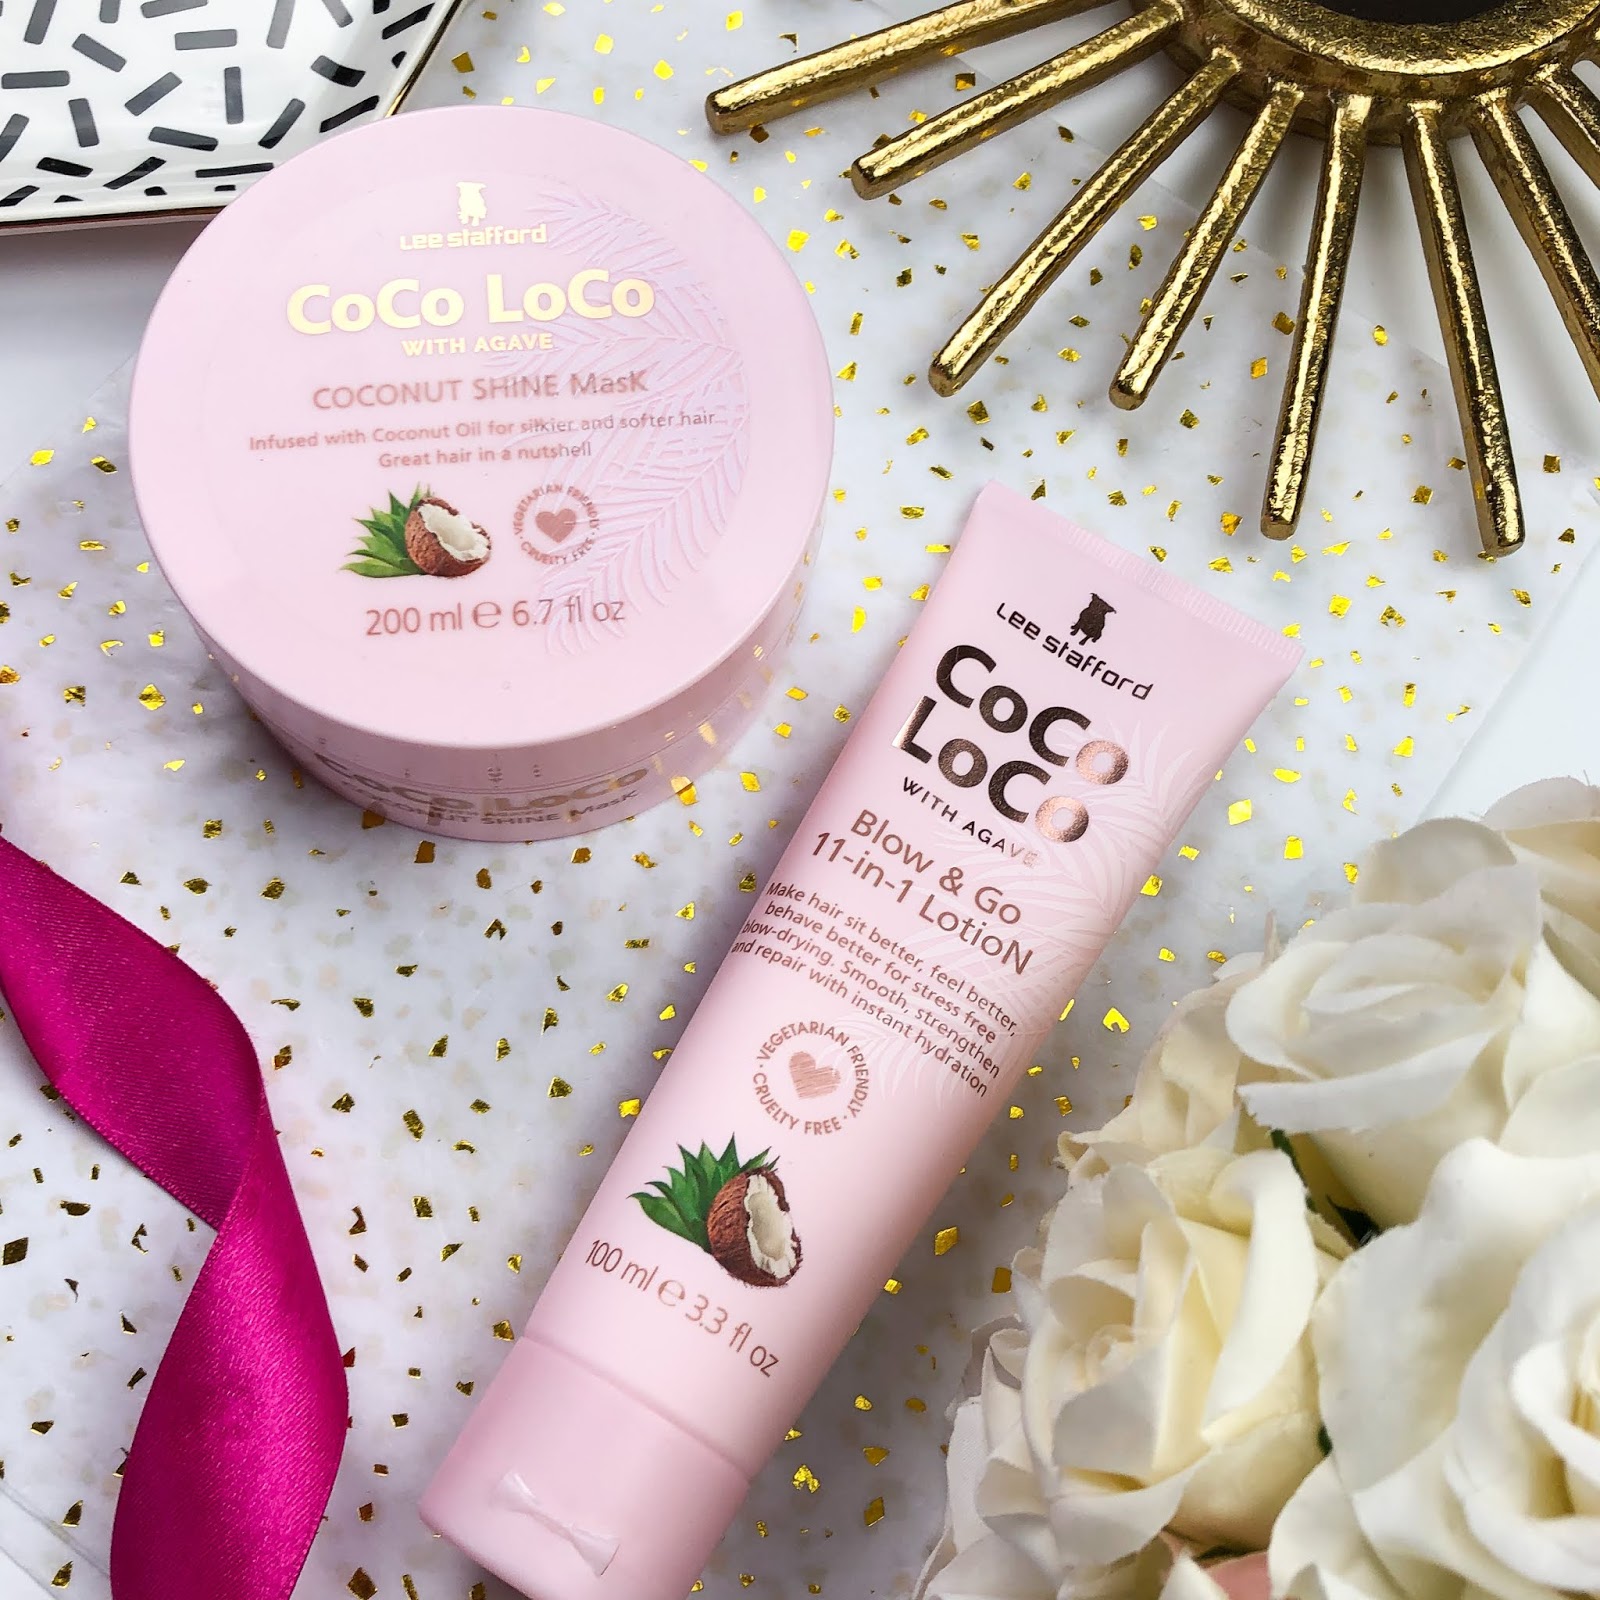 moronic Symptomer Prisnedsættelse Two Products From Lee Stafford's New CoCo LoCo Agave Range | As Told By  Kirsty